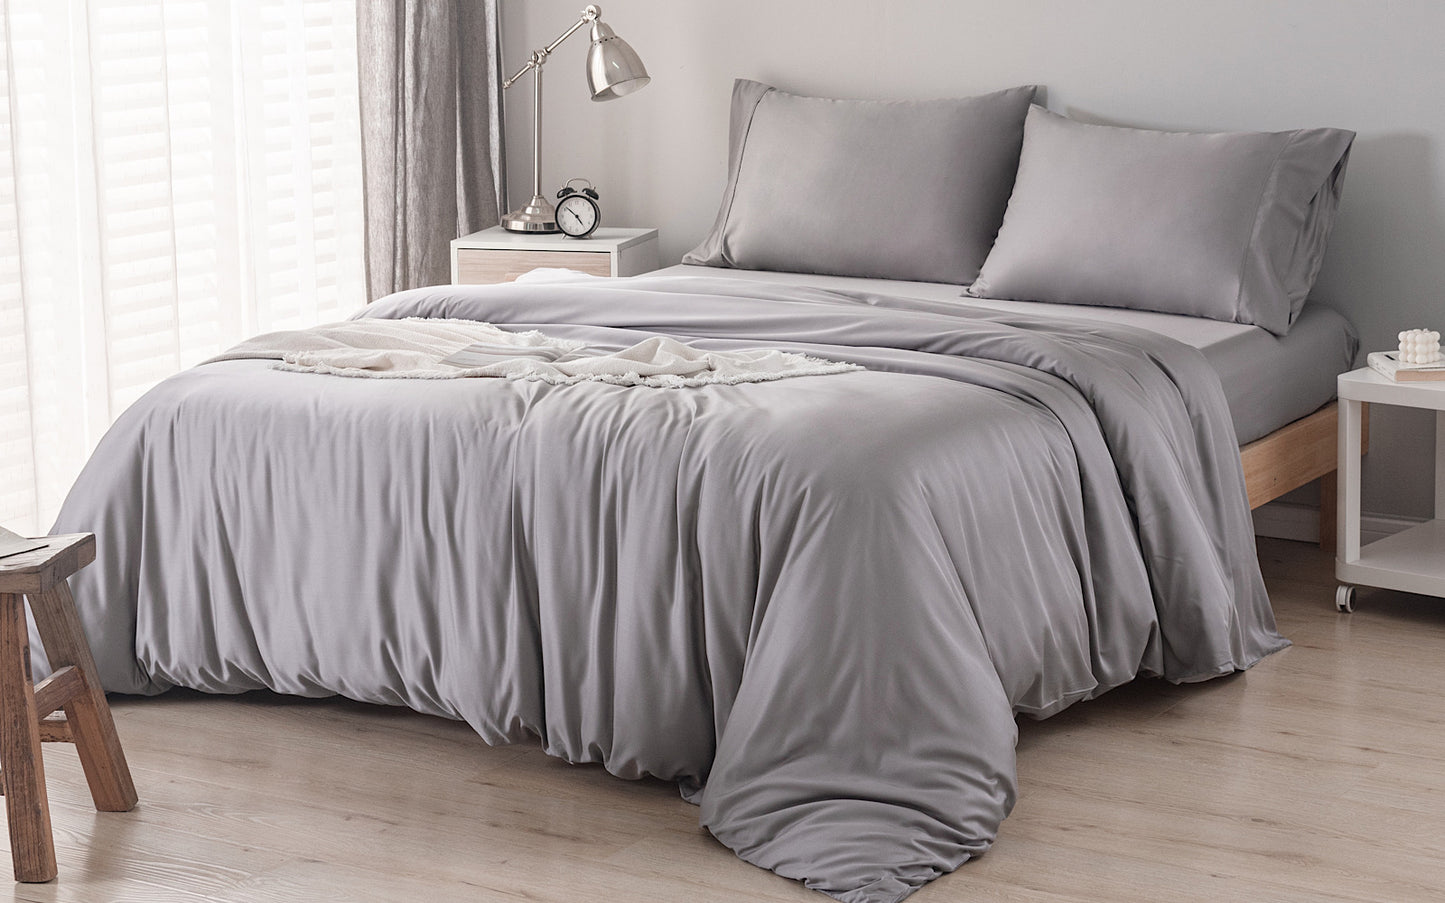 Grey King Size GF 100% Organic Bamboo 300tc Luxurious sateen weave Bedding Set Duvet Cover, Extra Deep 40cm Fitted Sheet, 2 x Pillow Cases